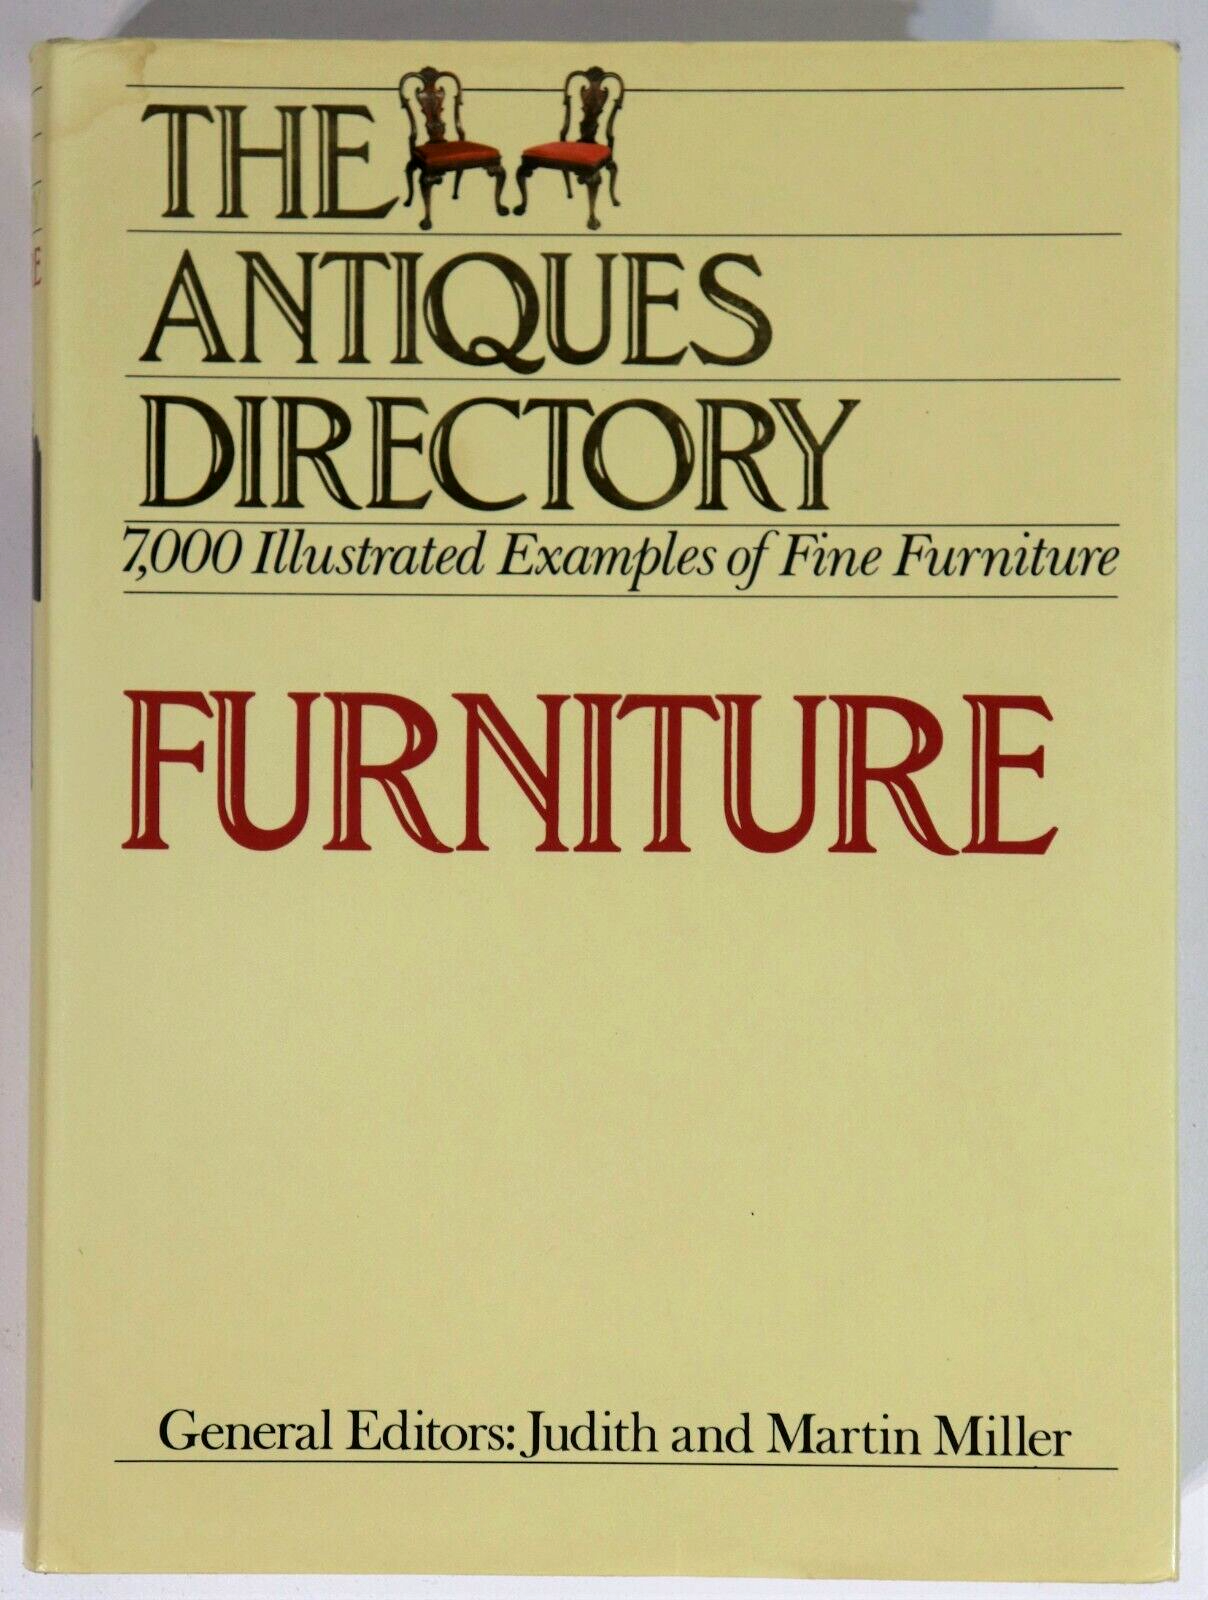 The Antiques Directory: Furniture - 1985 - Antique Furniture Reference Book